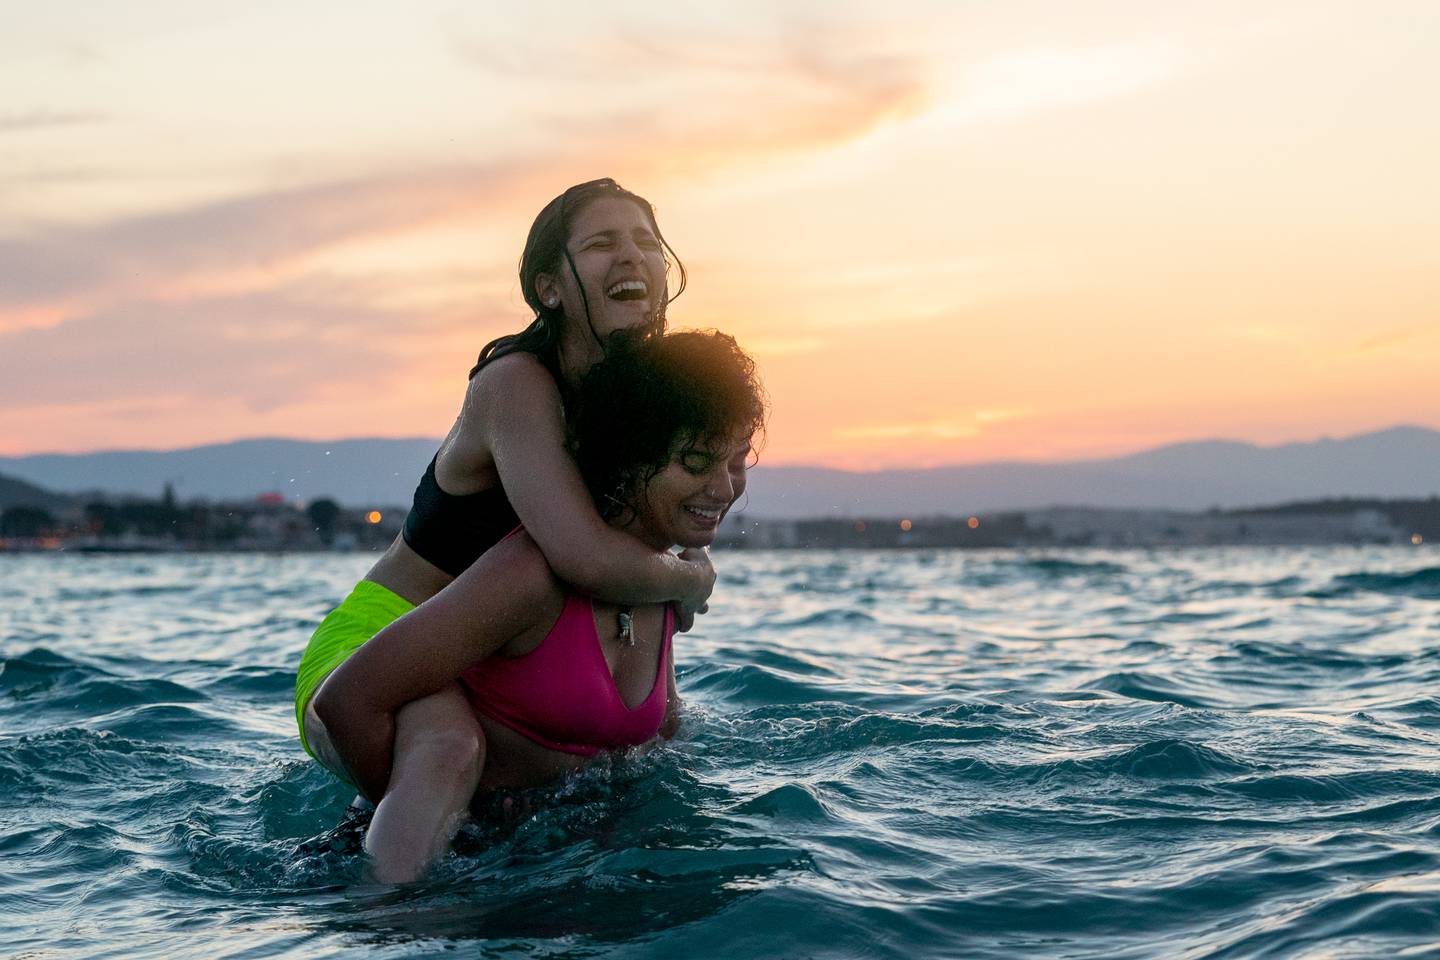 Nathalie and Manal Issa play Syrian refugees sisters Yusra and Sara Mardini in 'The Swimmers', co-written and directed by Sally El Hosaini. Photo: Netflix 